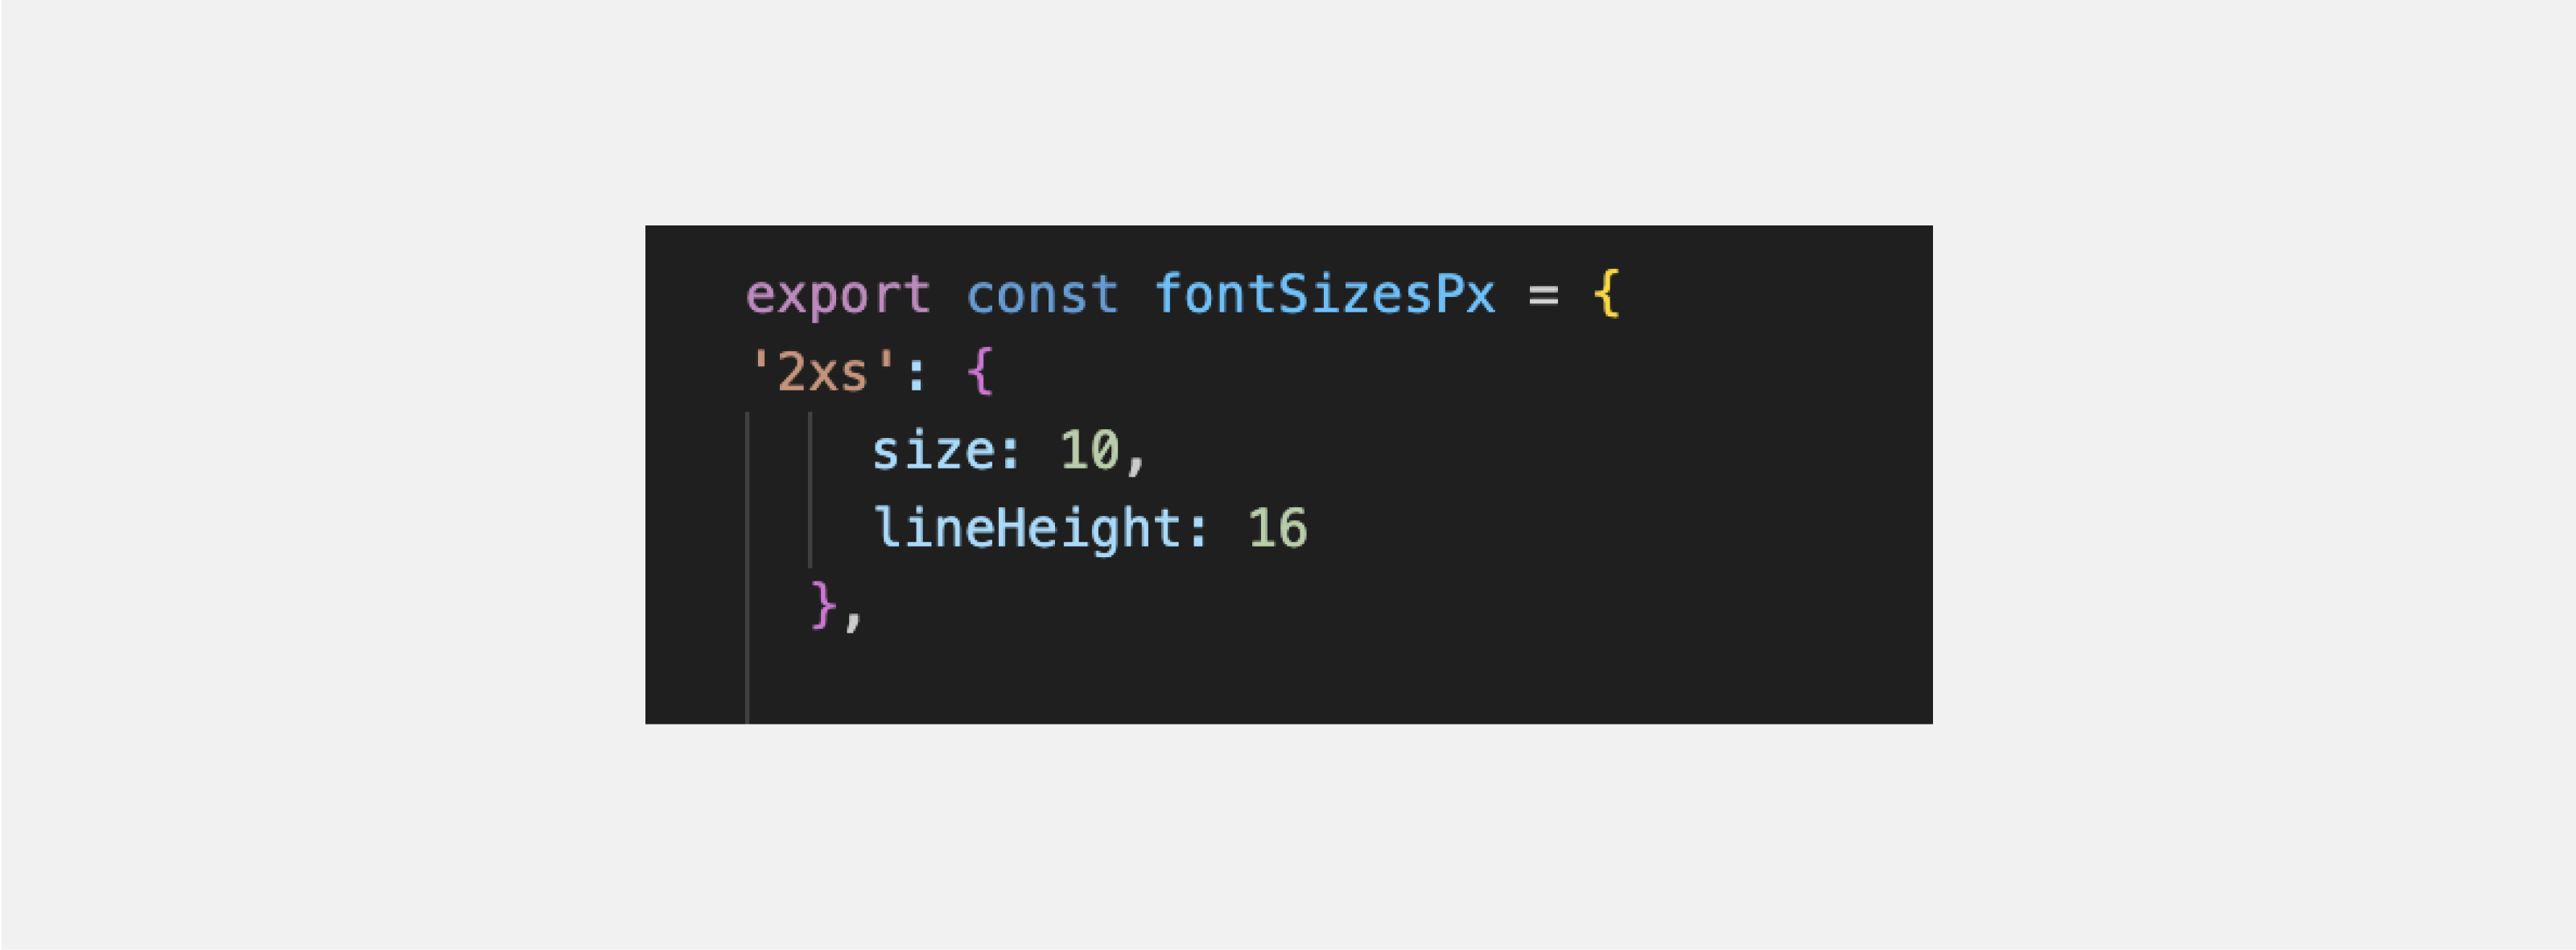 Screenshot of JavaScript code defining the fontSizesPx variable. This variable contains an object that maps font size names (e.g. 2xs) to objects with size (10) and lineHeight (16) values.